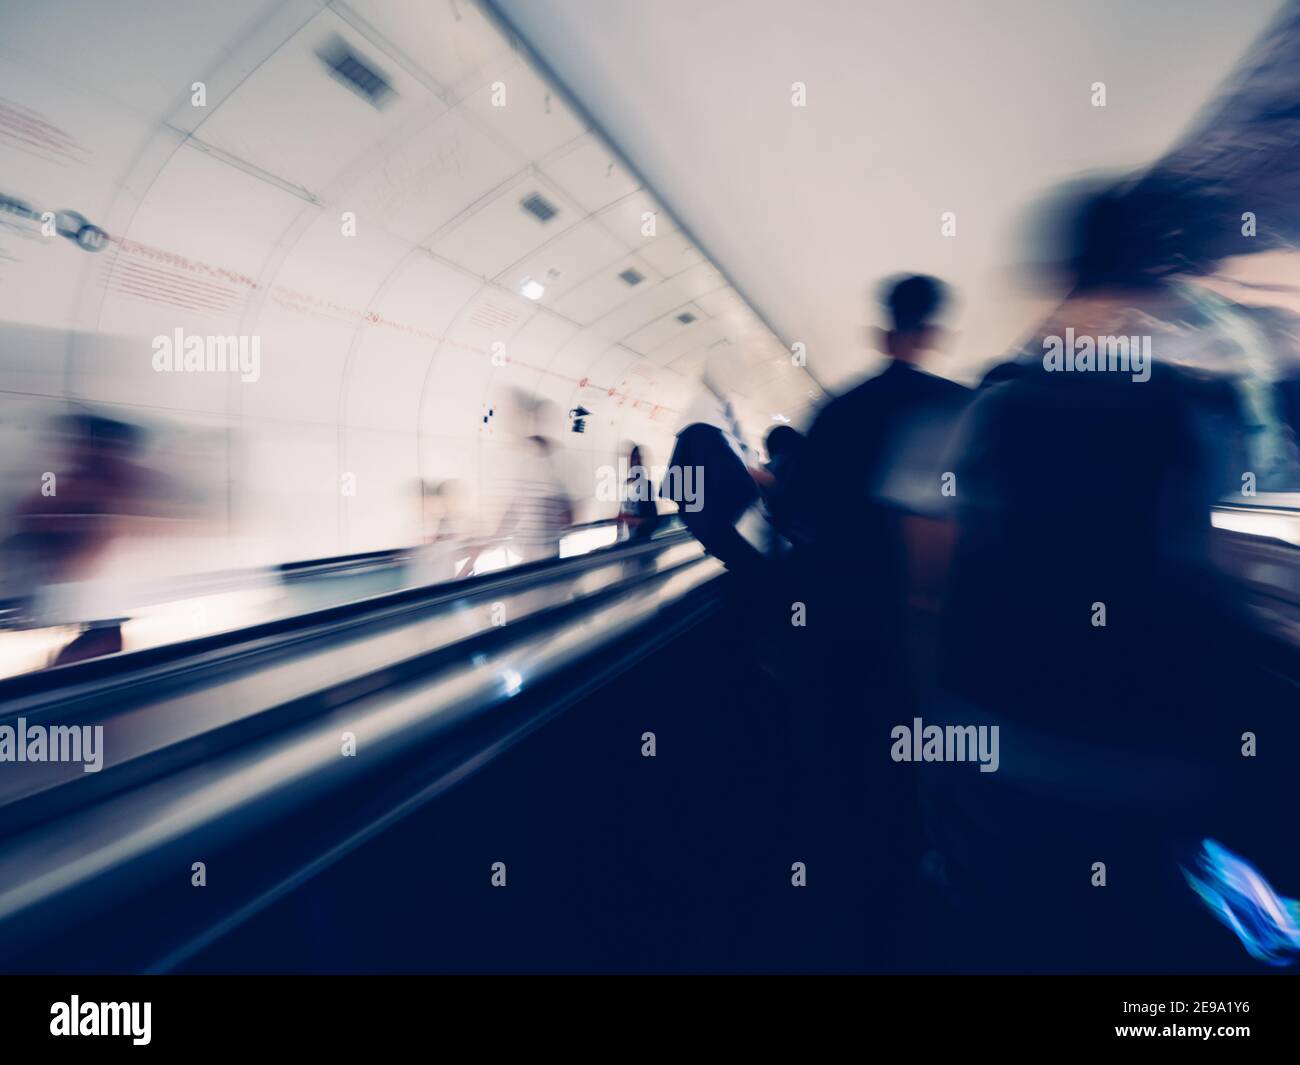 Blurred motion silhouettes of unrecognizable male with backpack inside Parisian underground metro moving escalator walkway taking the fastest route to interchanges with other lines Stock Photo